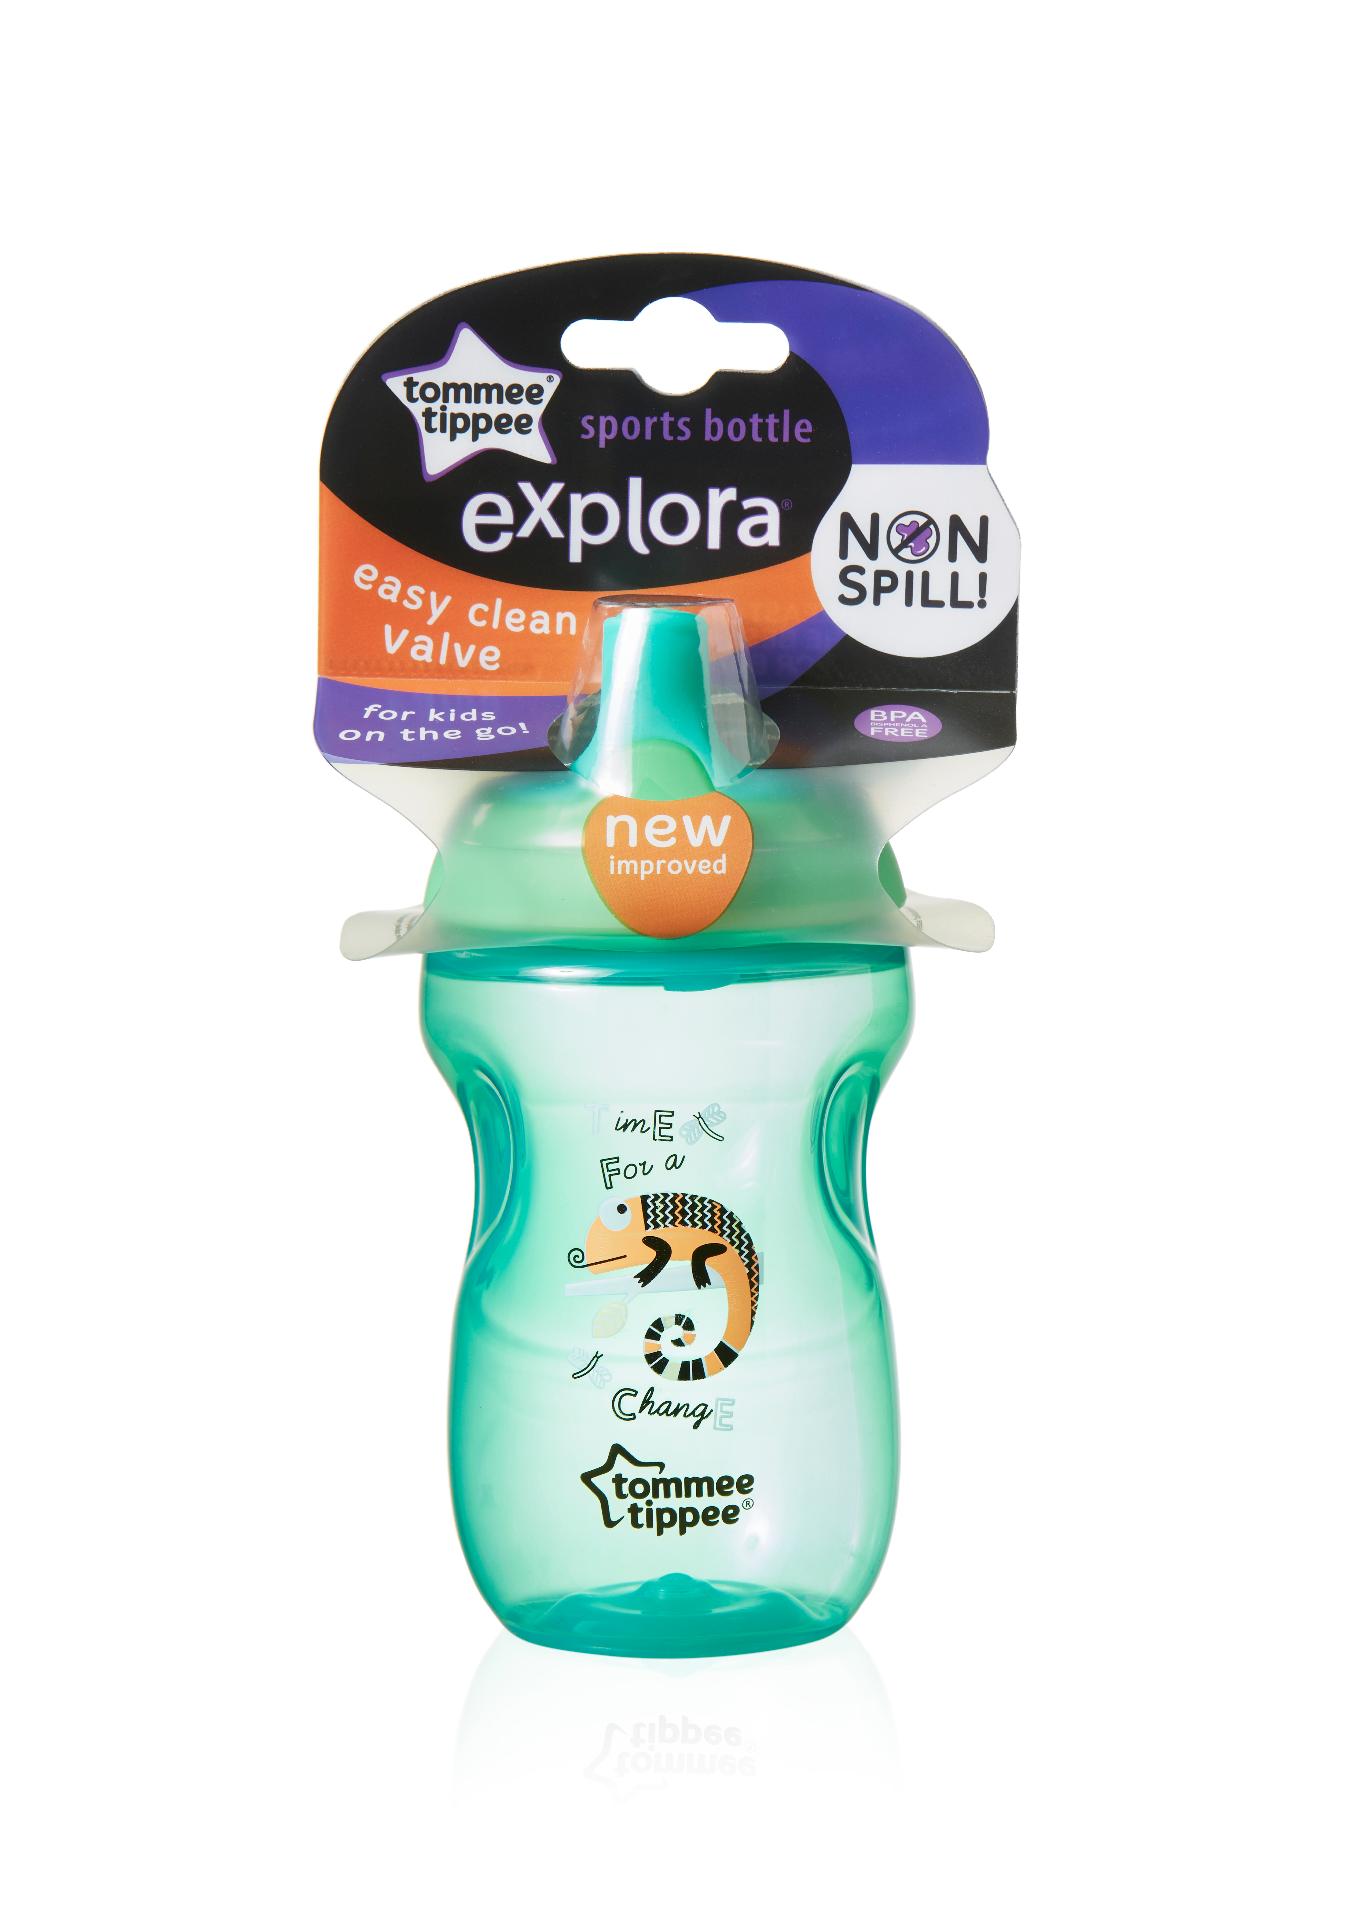 Explora Cana Sports, Tommee Tippee, 300ml ,Cameleon Verde